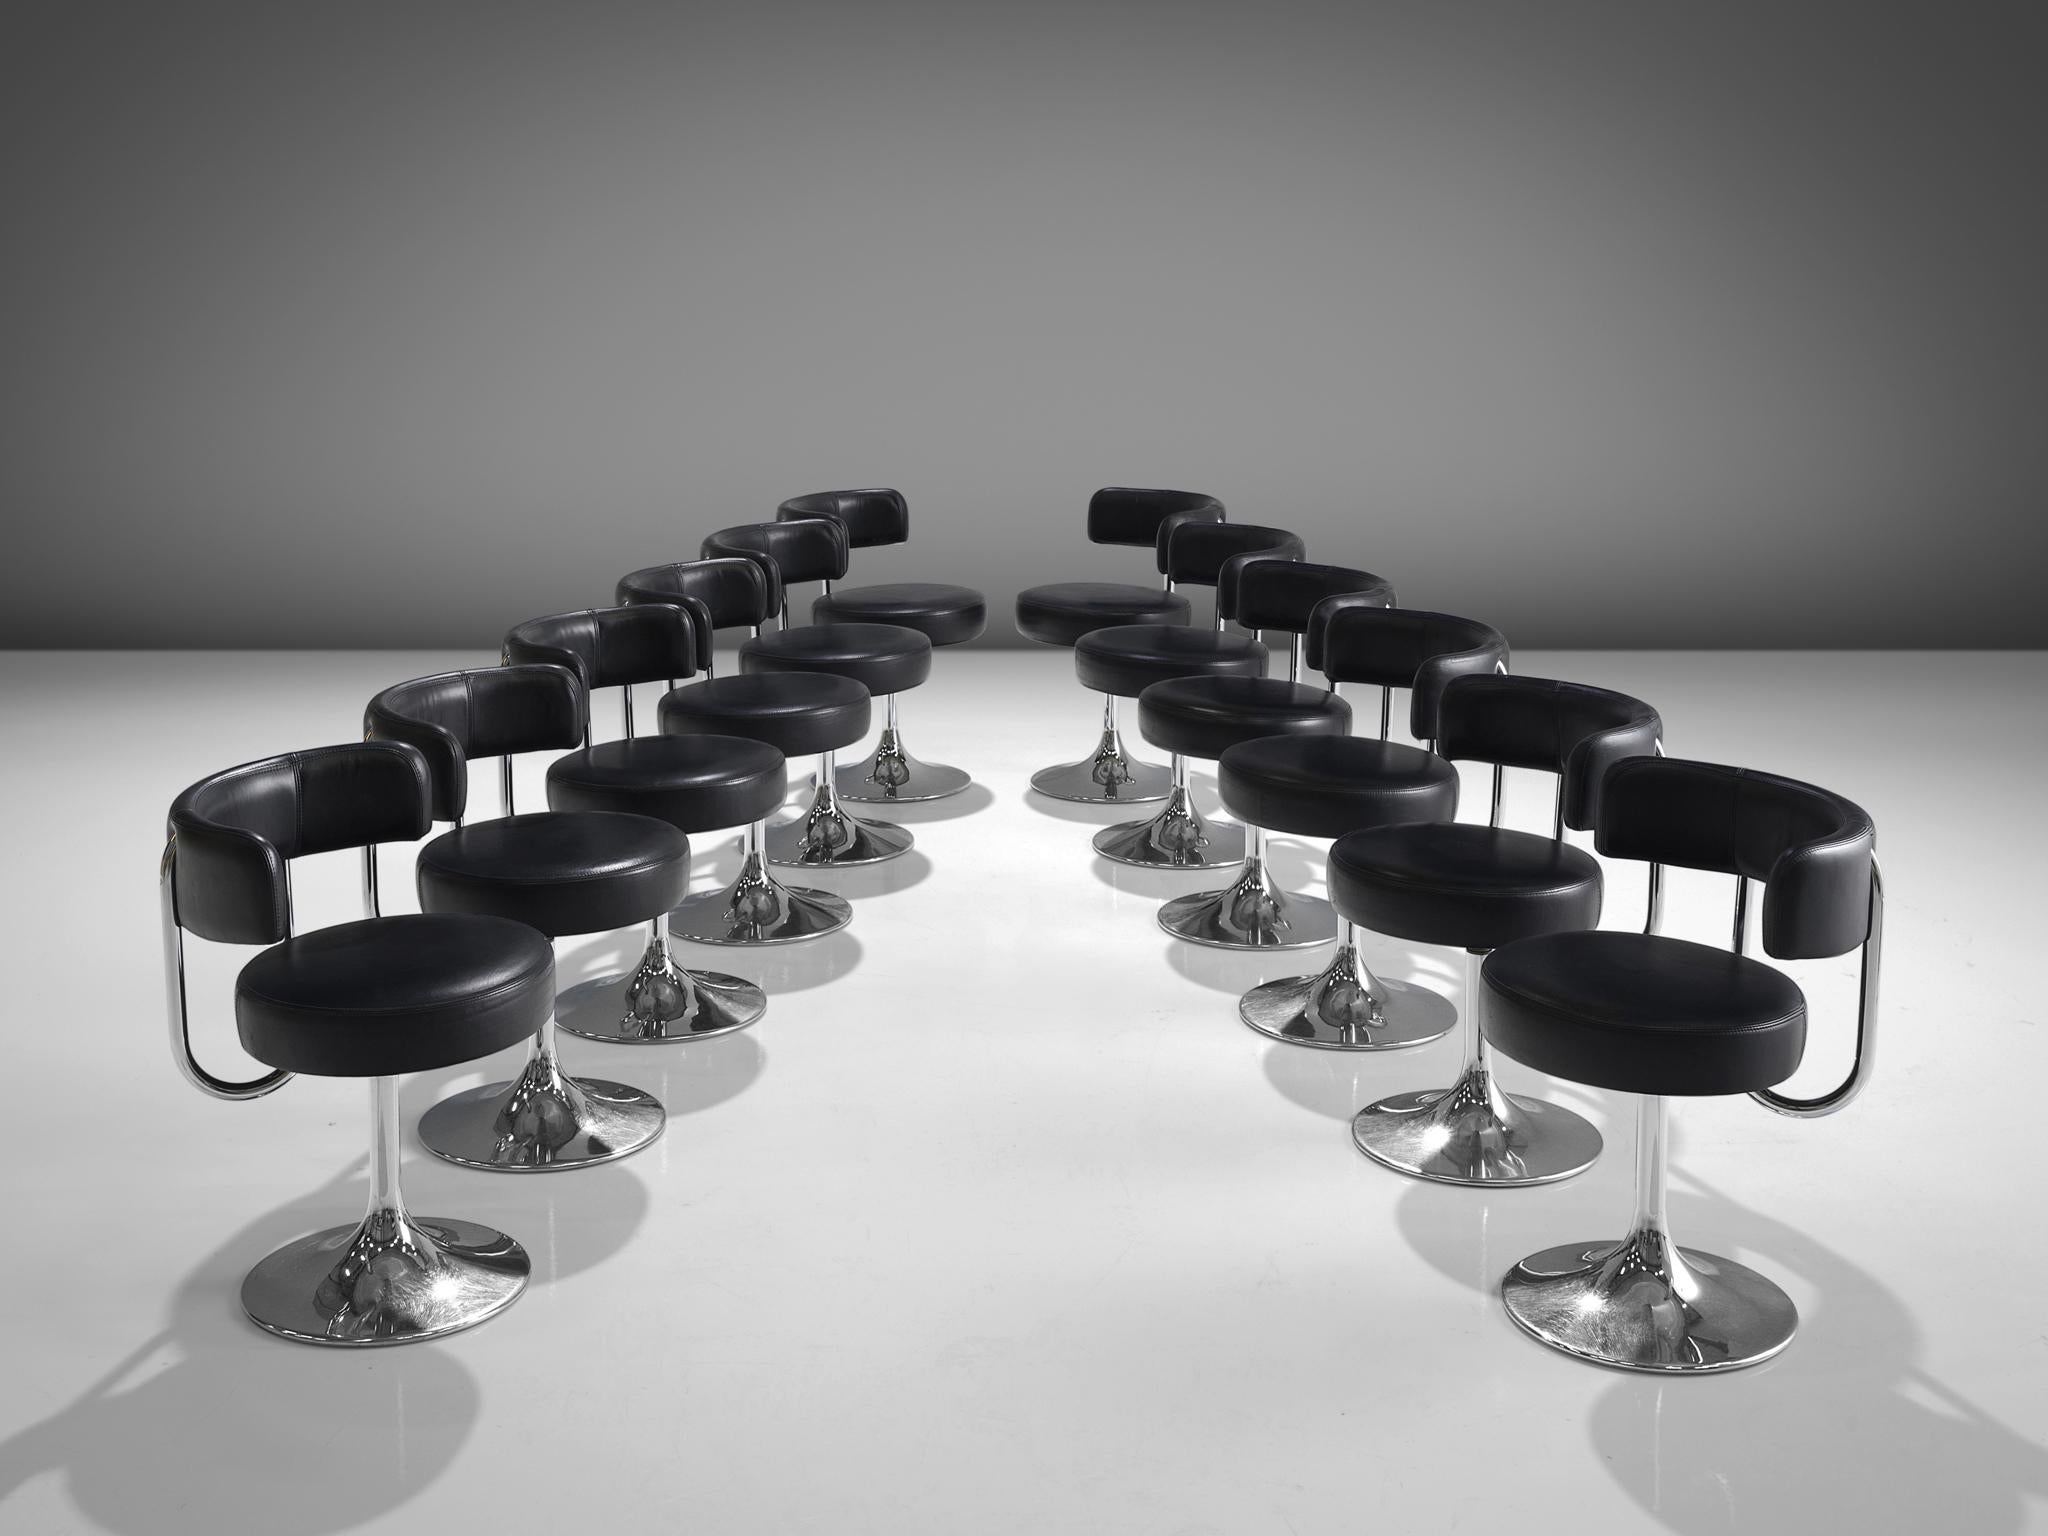 Börje Johanson for Johanson Design, set of twelve swivel dining chairs, metal, black leatherette, Sweden, 1970s.

Highly comfortable dining chairs in black leatherette upholstery. Due to the soft seat and back, these chairs provide a very pleasant